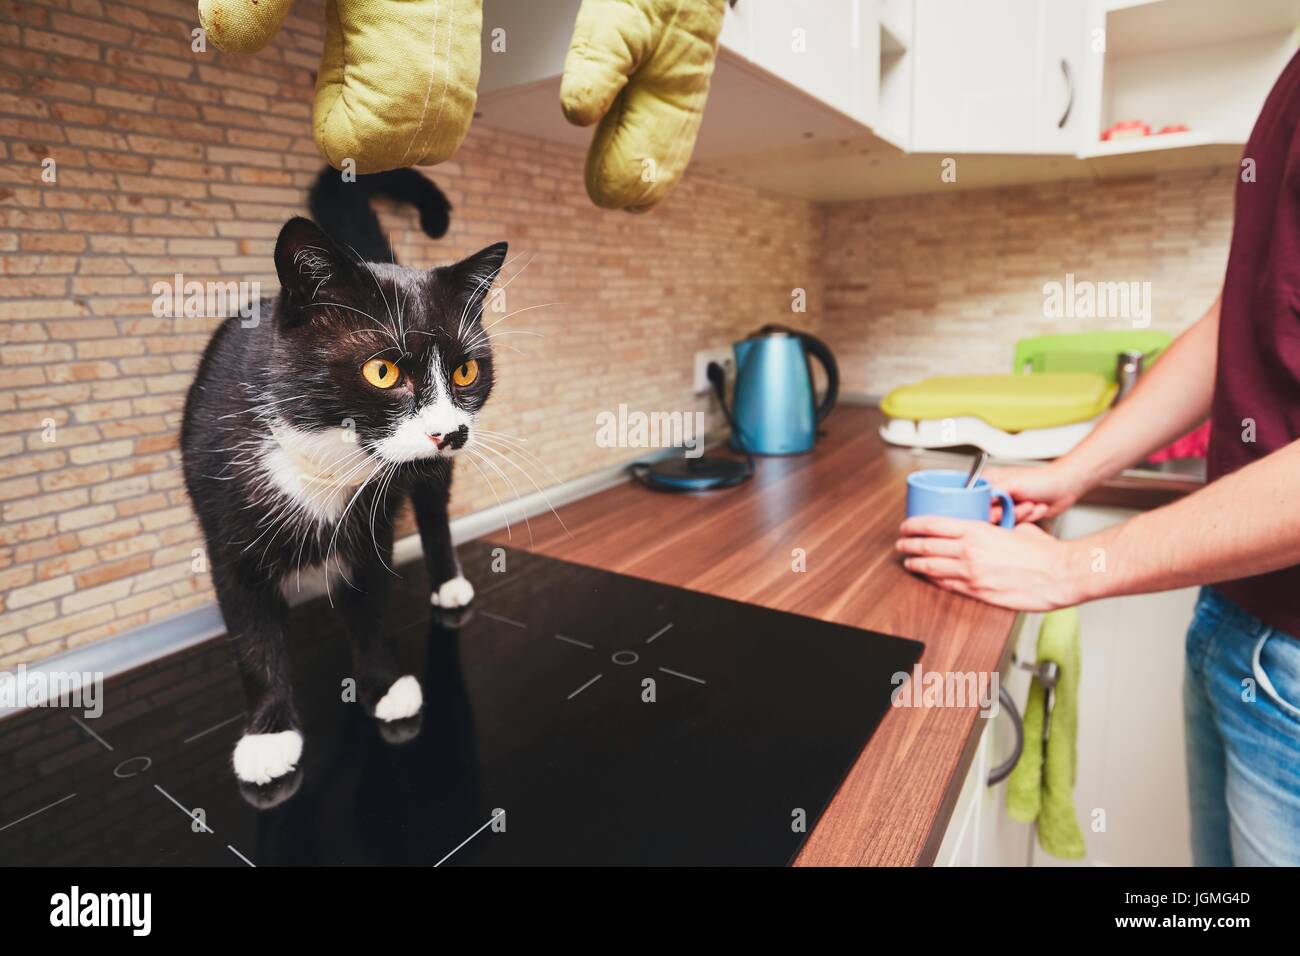 Life with domestic animals. Man with curious cat in kitchen. Stock Photo